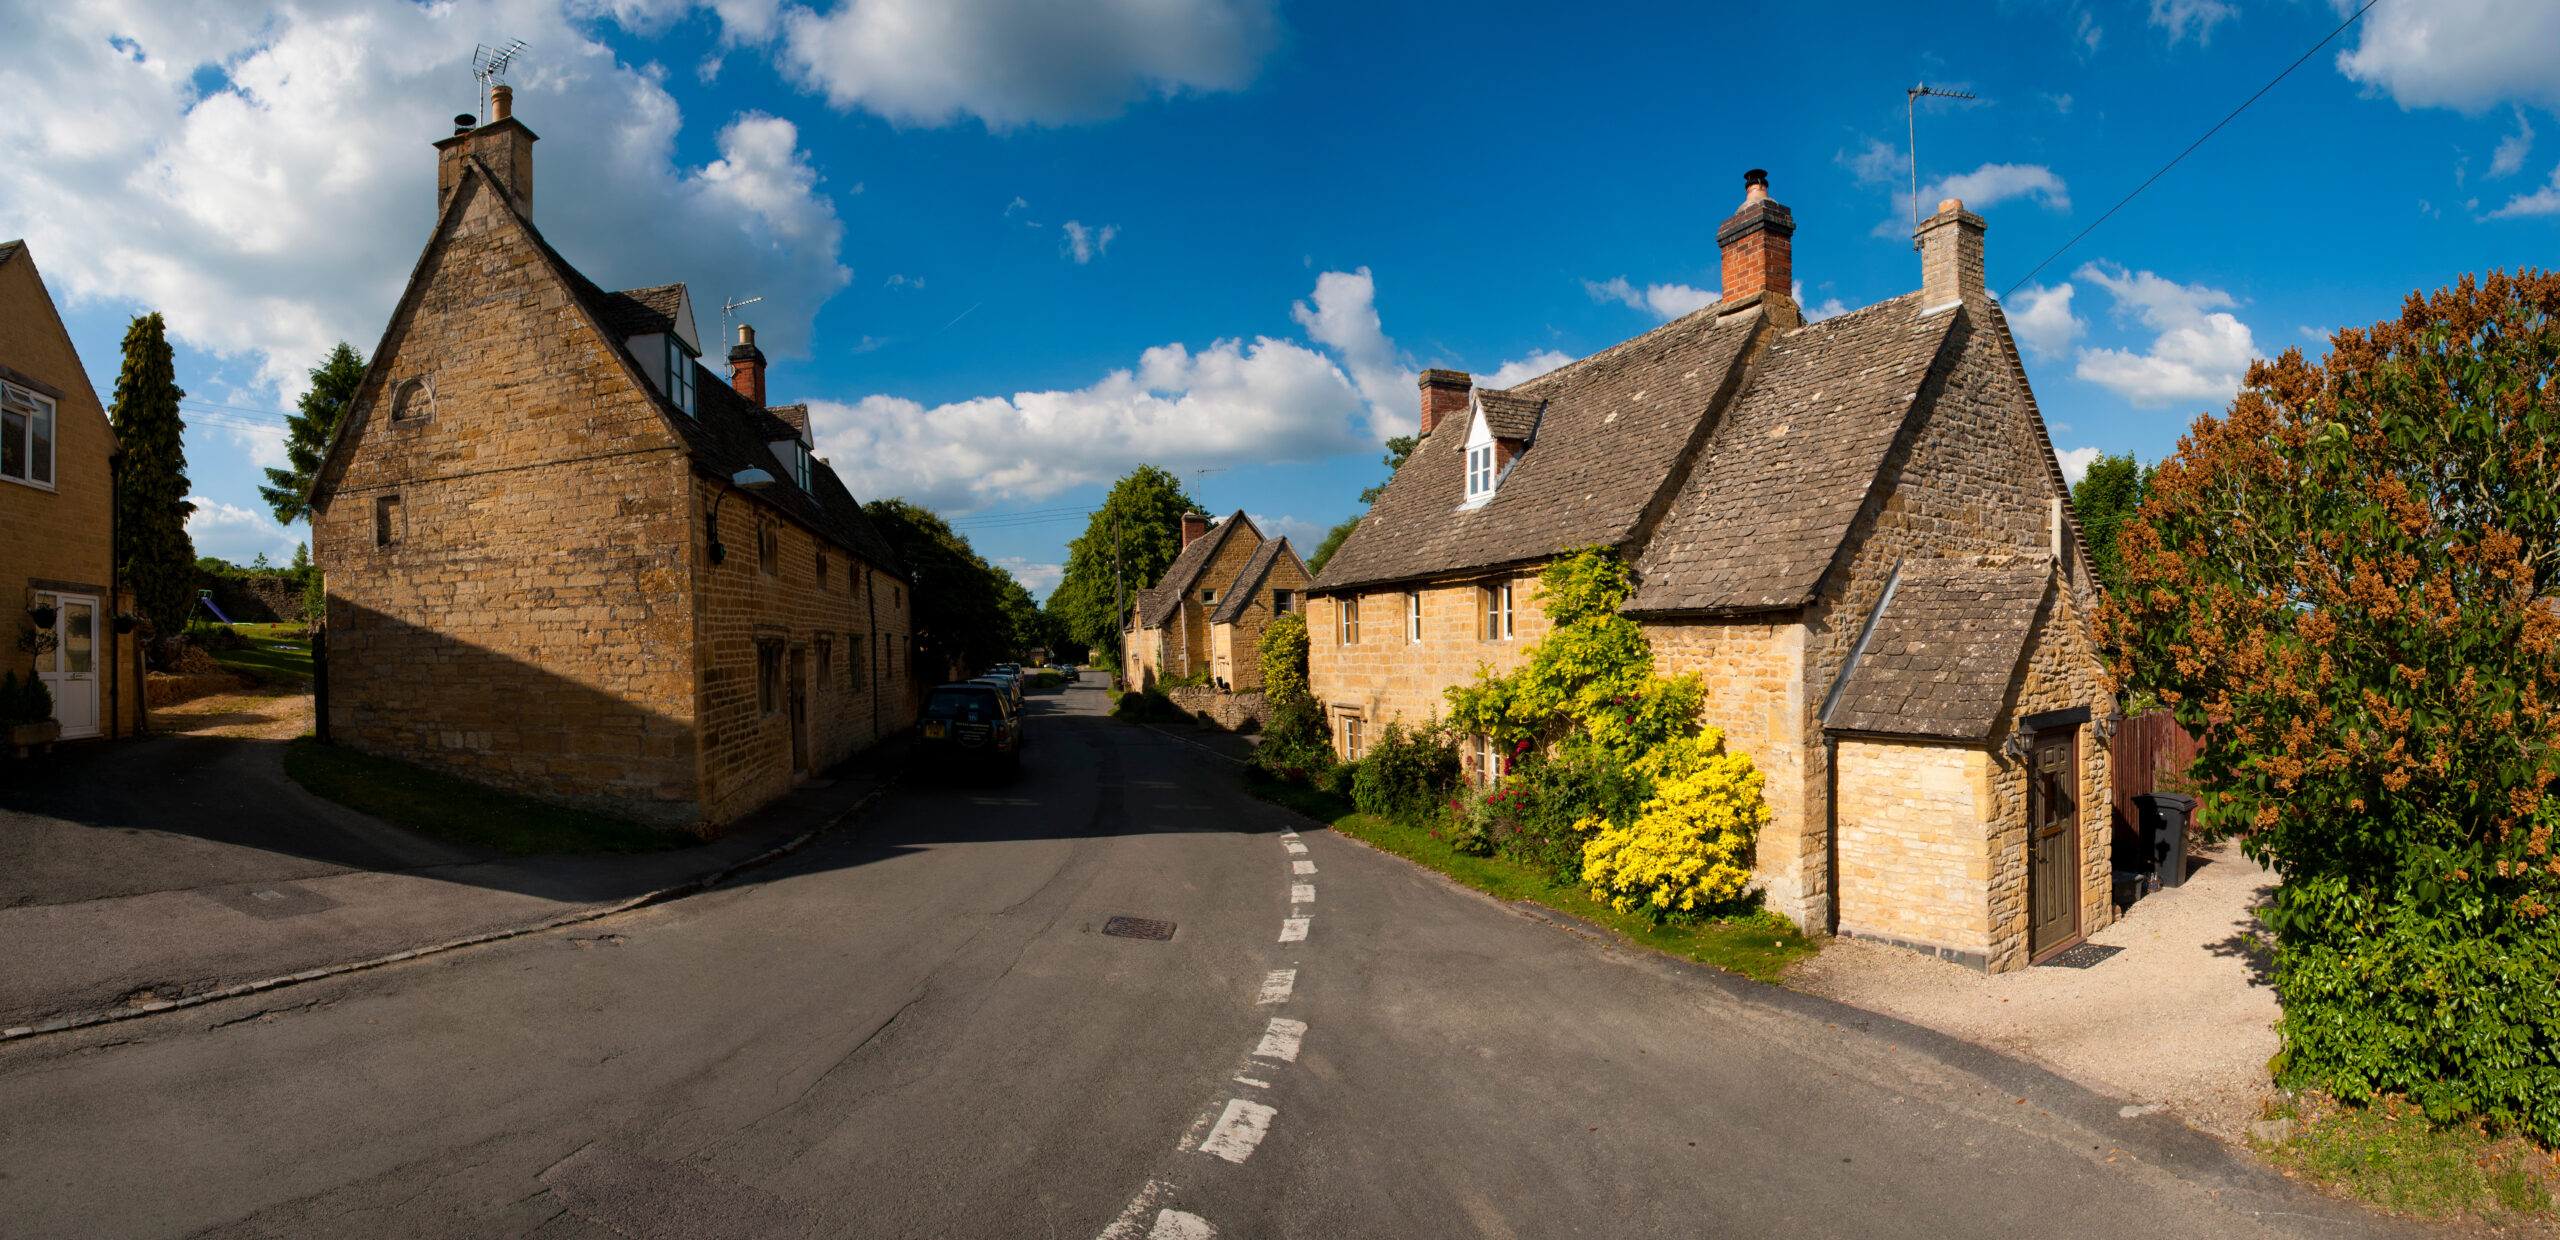 Longborough, a typical village in The Cotswolds, Gloucestershire, England, United Kingdom, Europe